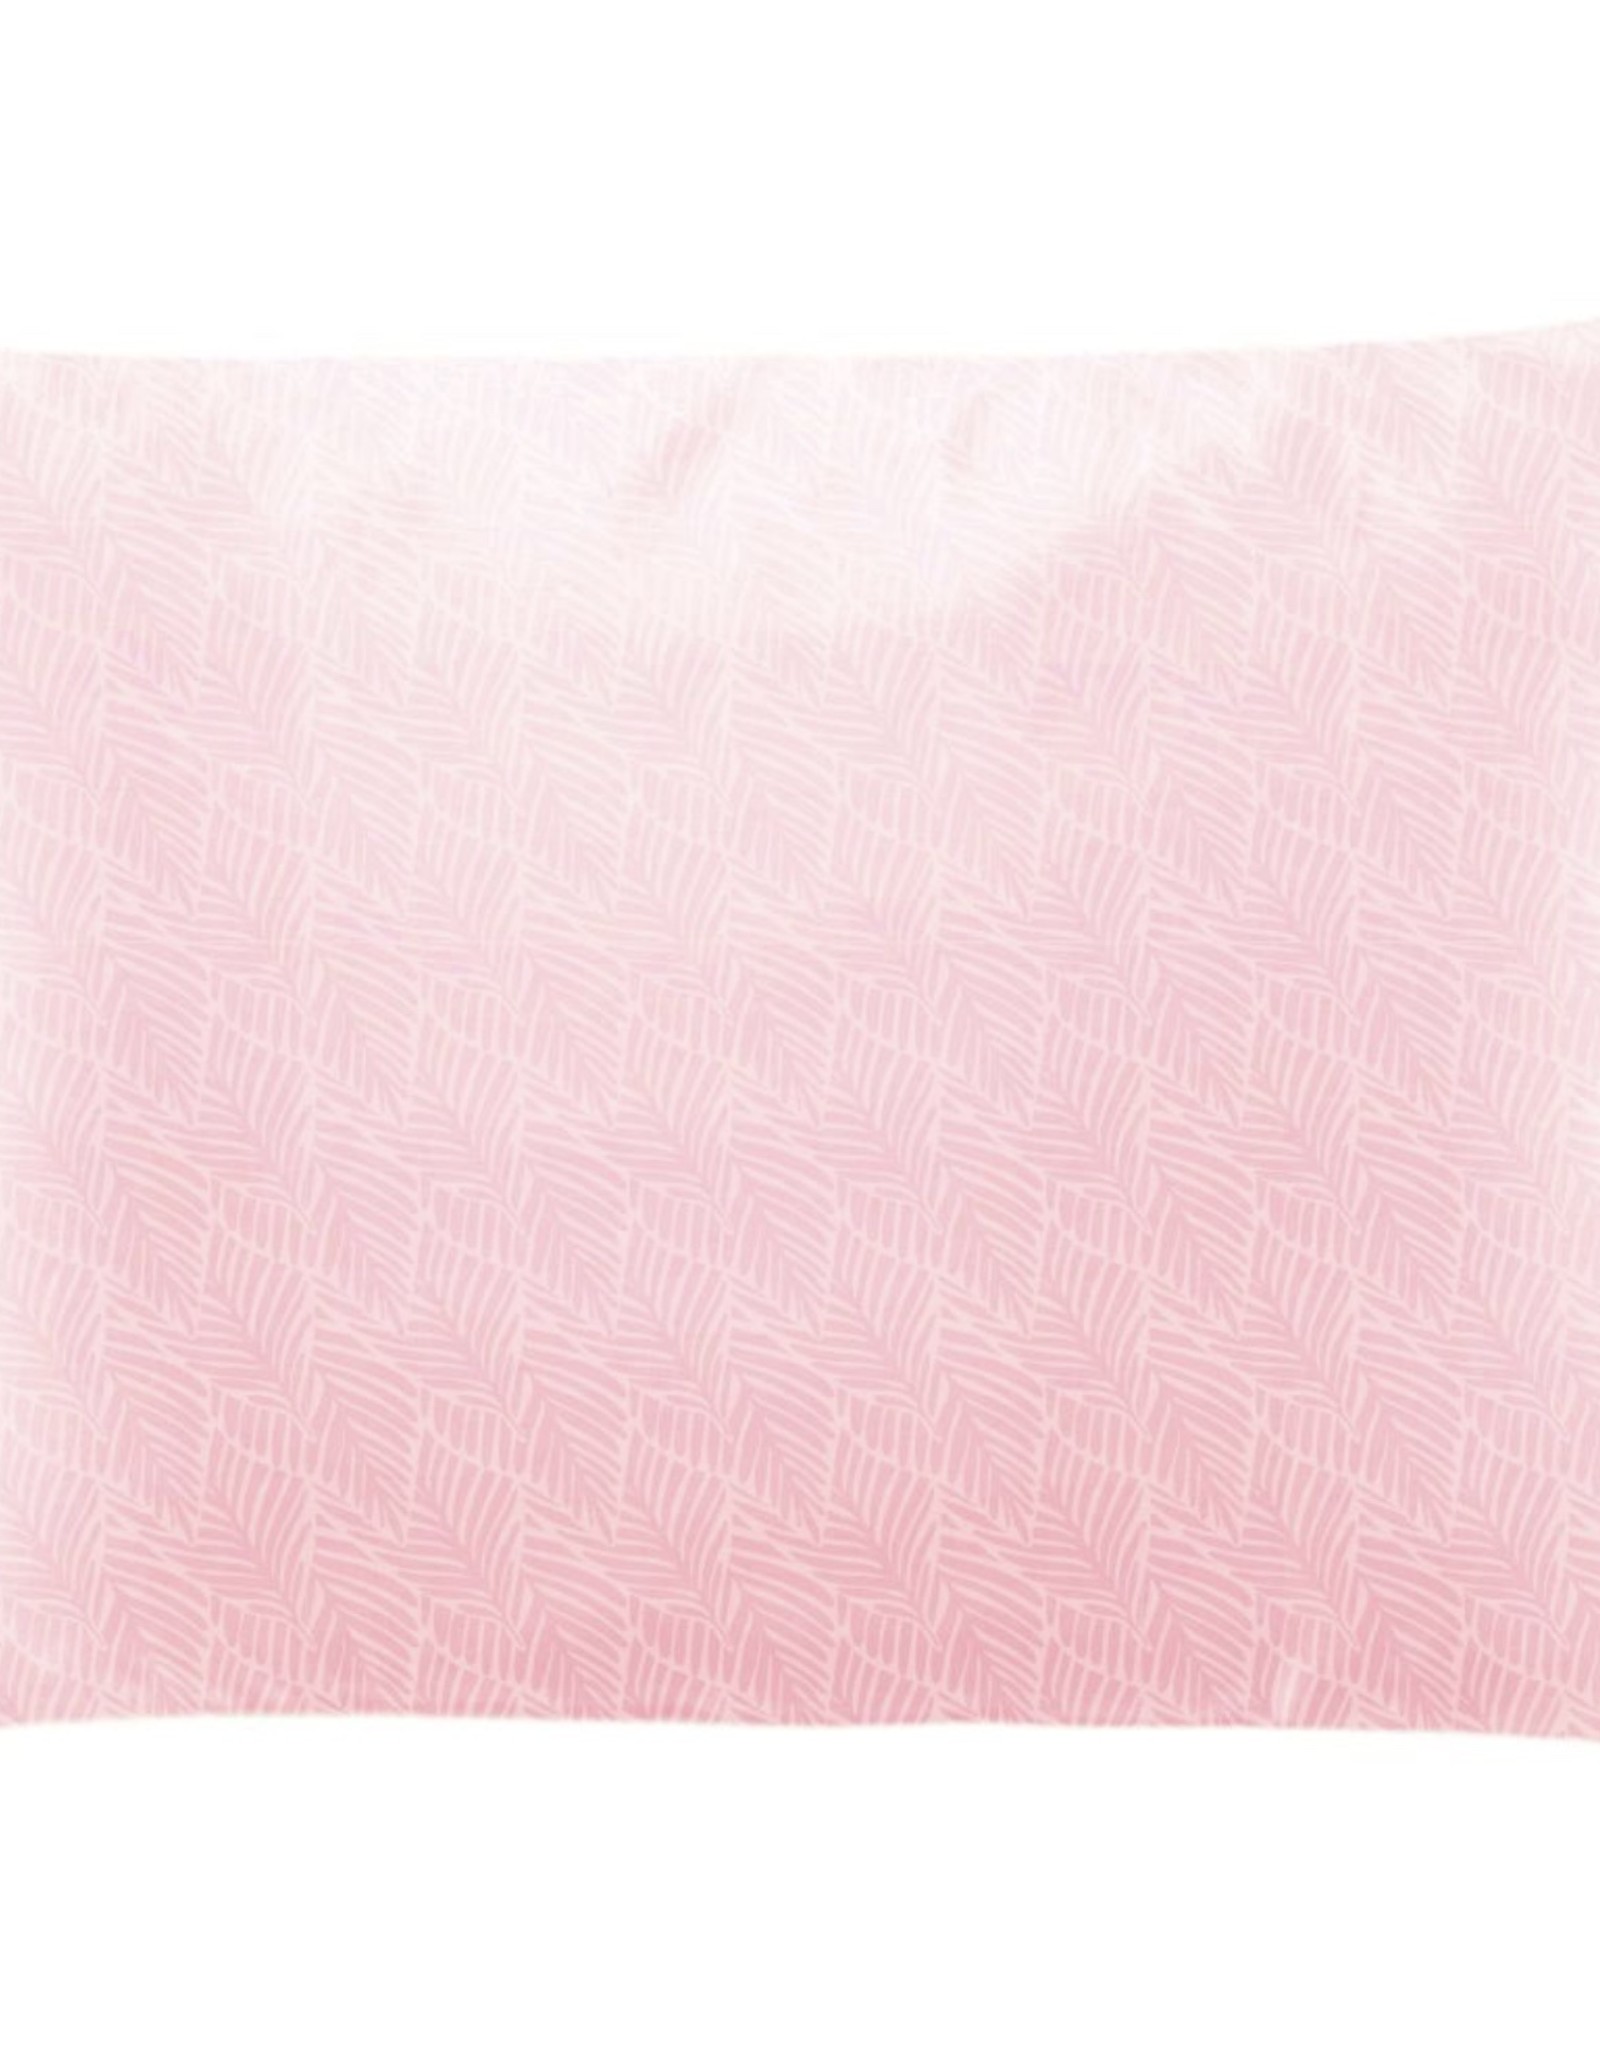 PATTERNED  SATIN PILLOWCASES